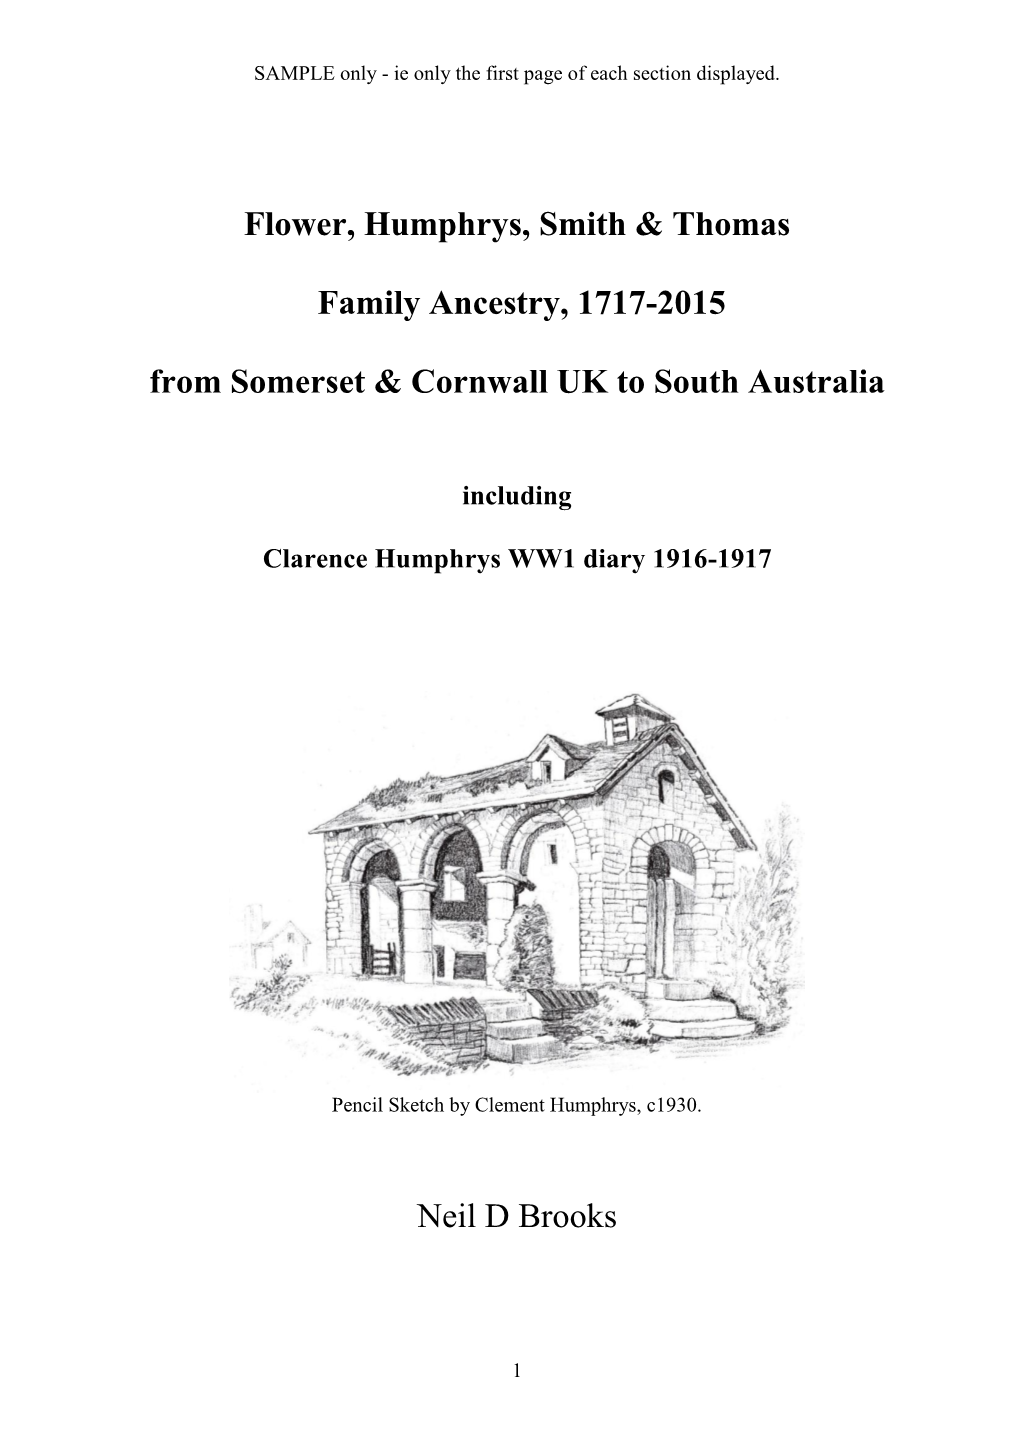 Flower, Humphrys, Smith & Thomas Family Ancestry, 1717-2015 From